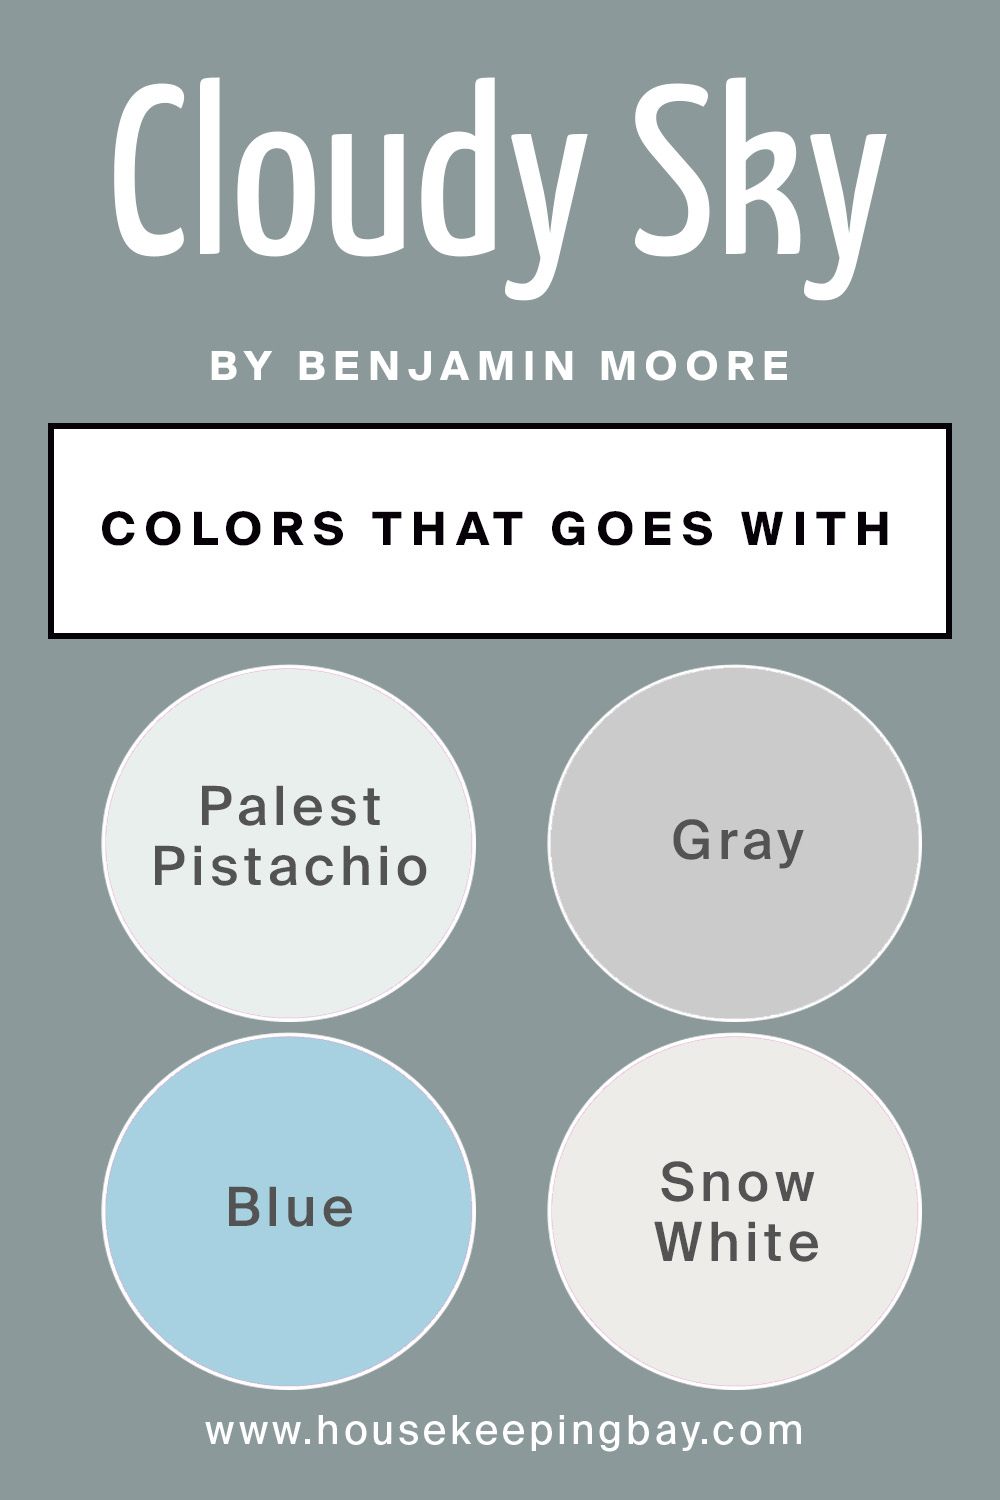 colors that go with cloudy sky 2122-30 by benjamin moore